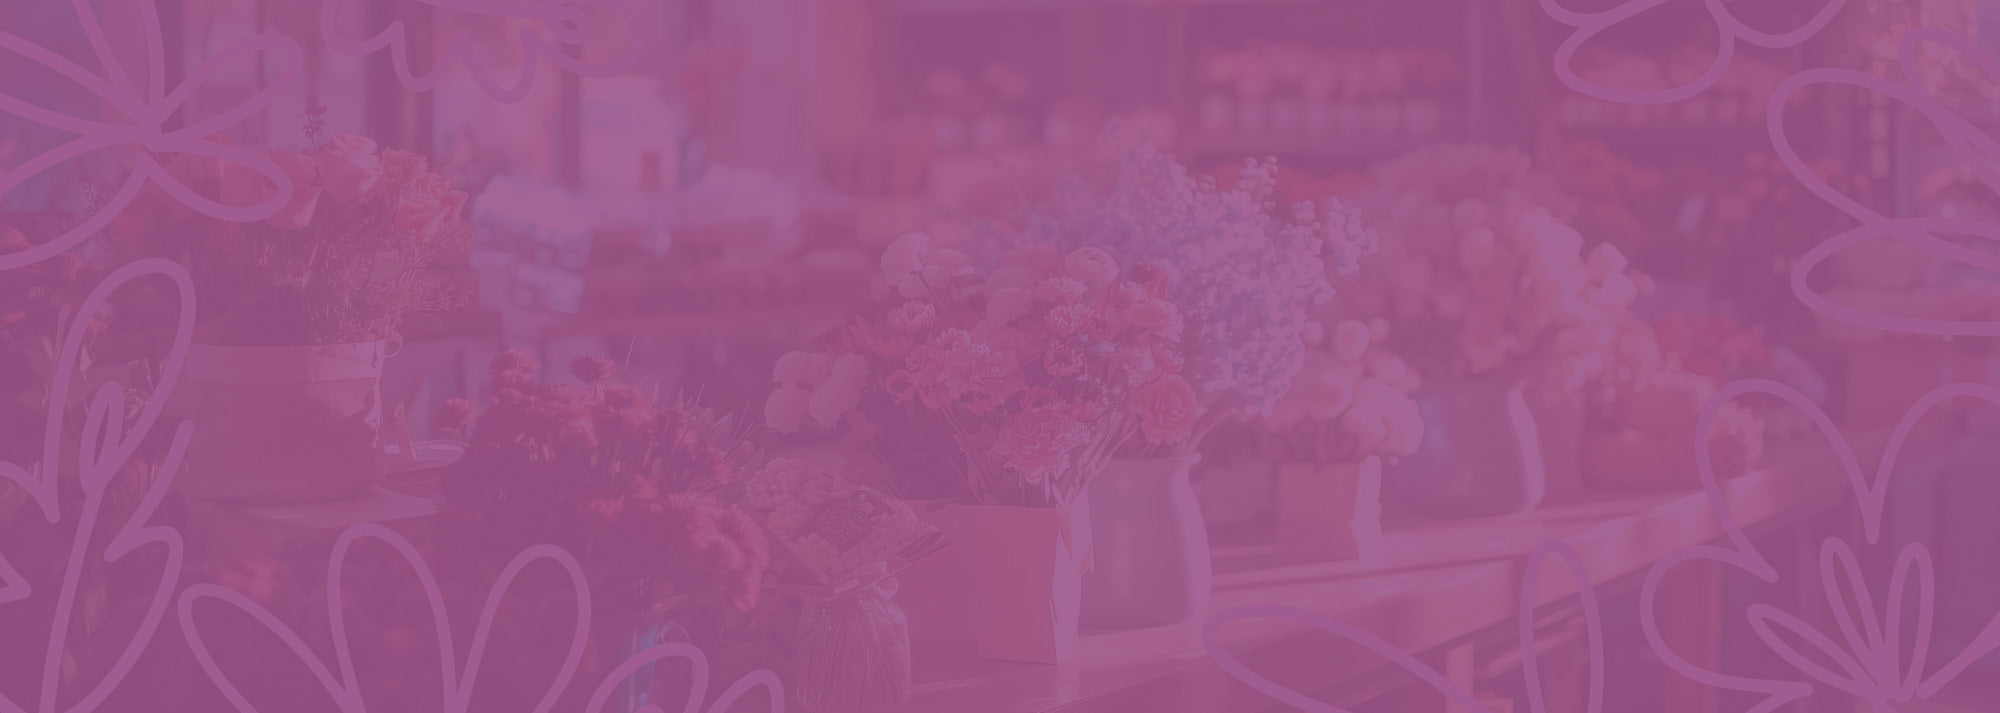 A monochrome purple overlay of a flower shop interior, with an abundance of floral arrangements and bouquets creating a feast for the senses - Fabulous Flowers and Gifts.